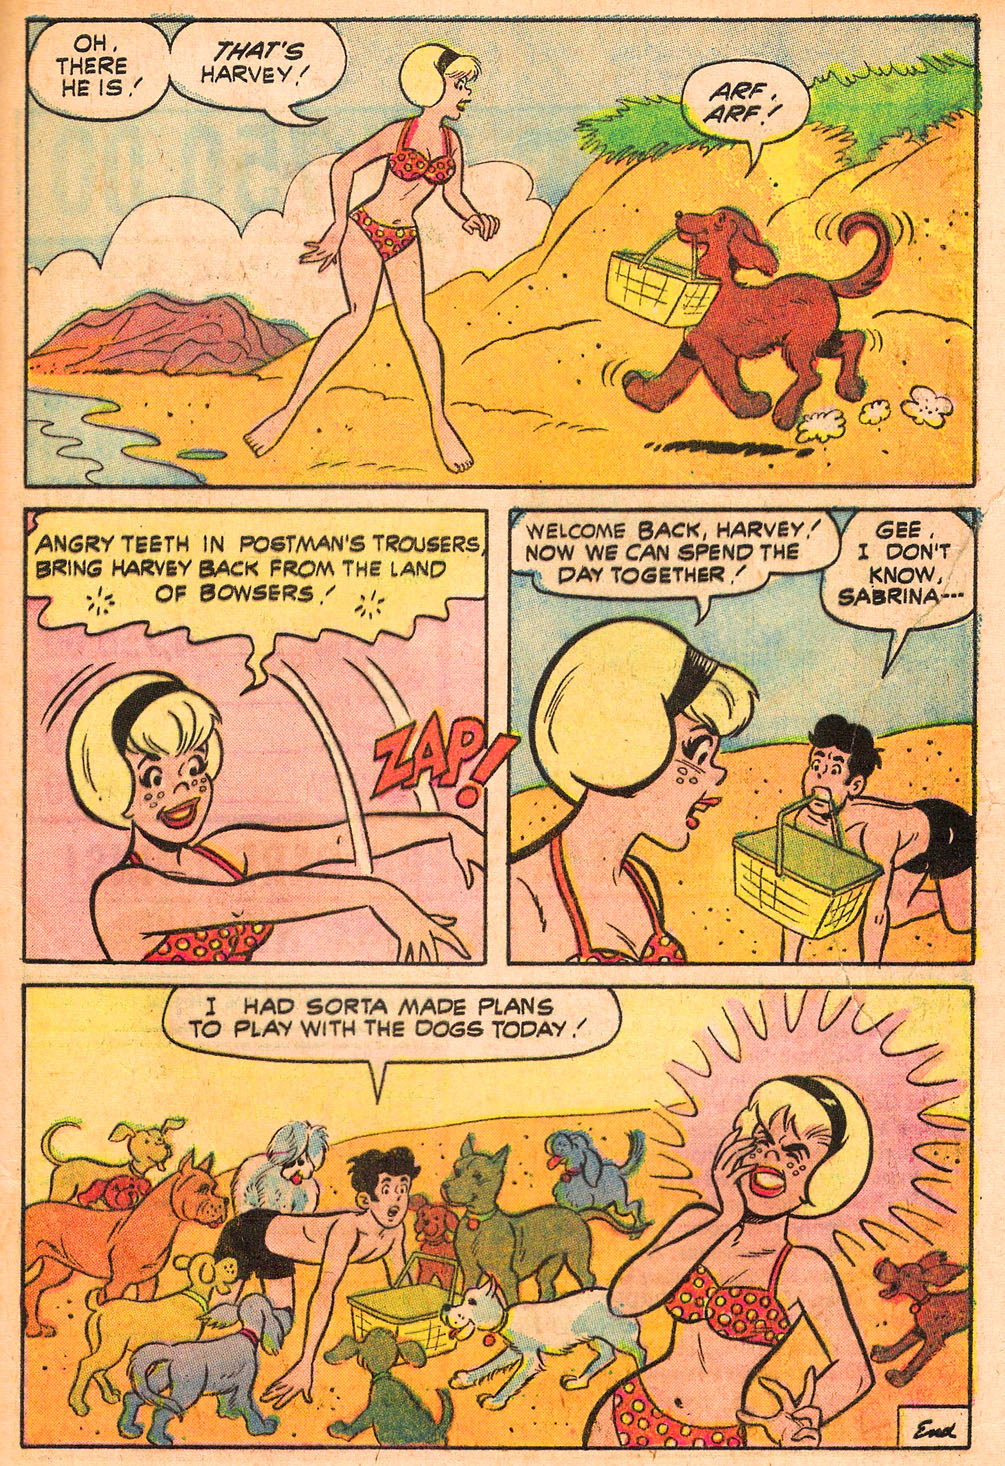 Sabrina The Teenage Witch (1971) Issue #8 #8 - English 27